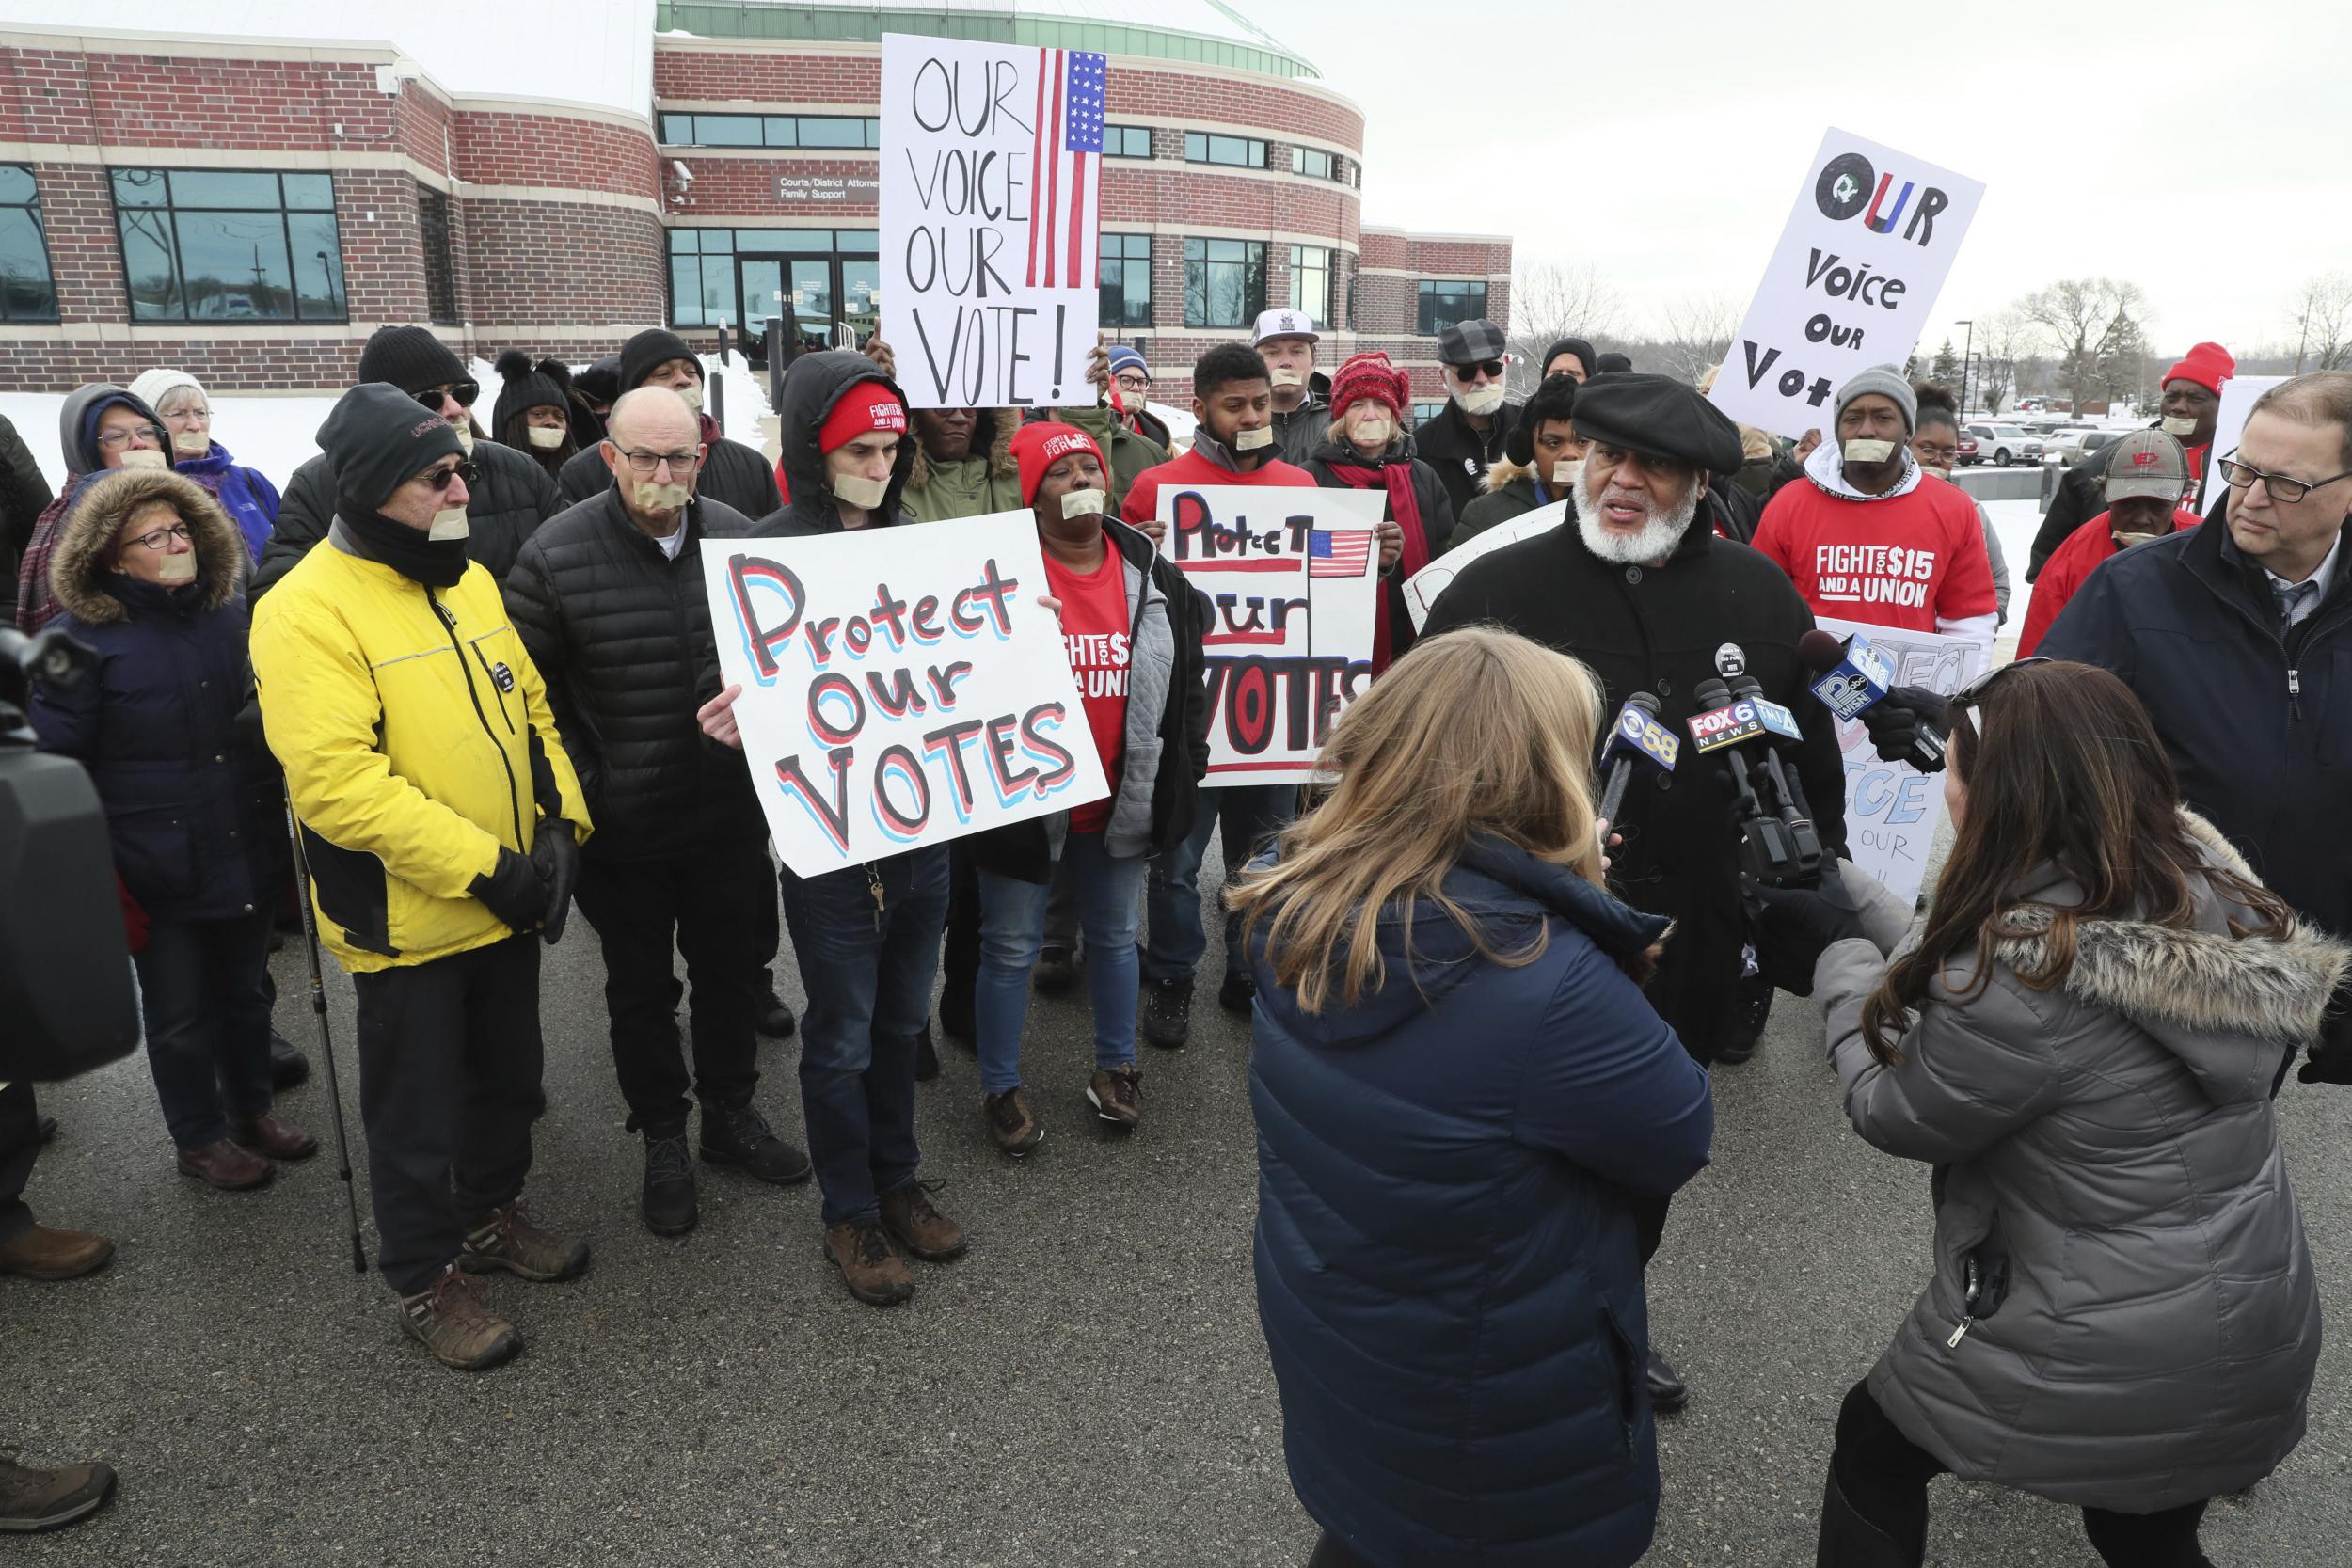 Gregory Lewis, leader of Souls to the Polls, led a protest outside the Ozaukee County Courthouse in Port Washington, Wisconsin on Monday as a local judge ordered a mass voter roll purge to take effect.